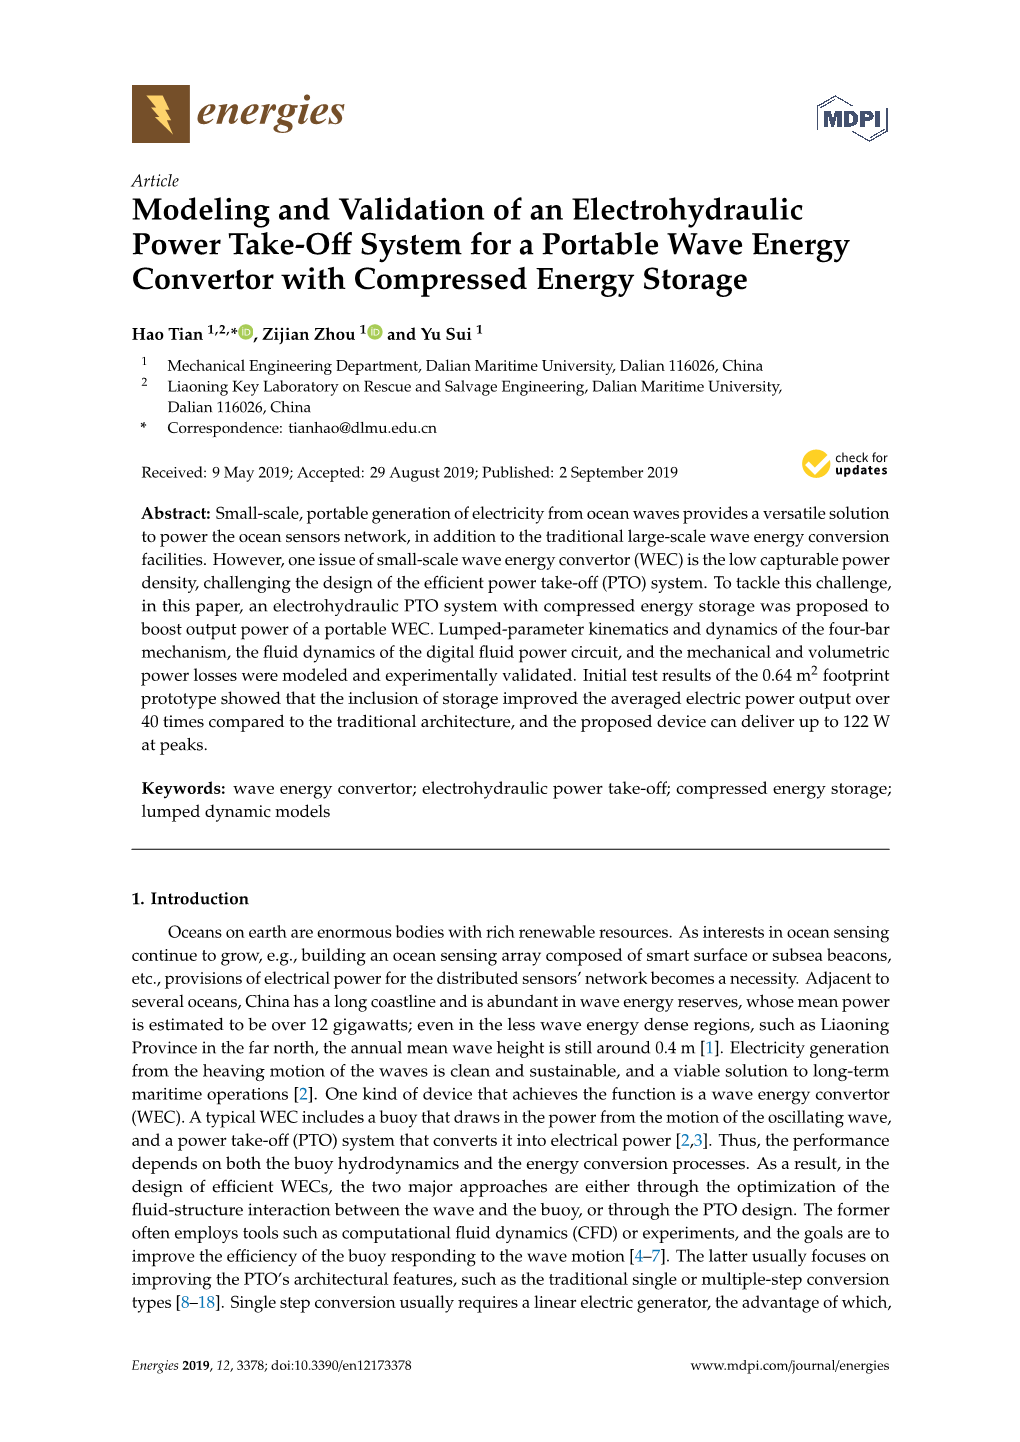 Modeling and Validation of an Electrohydraulic Power Take-Off